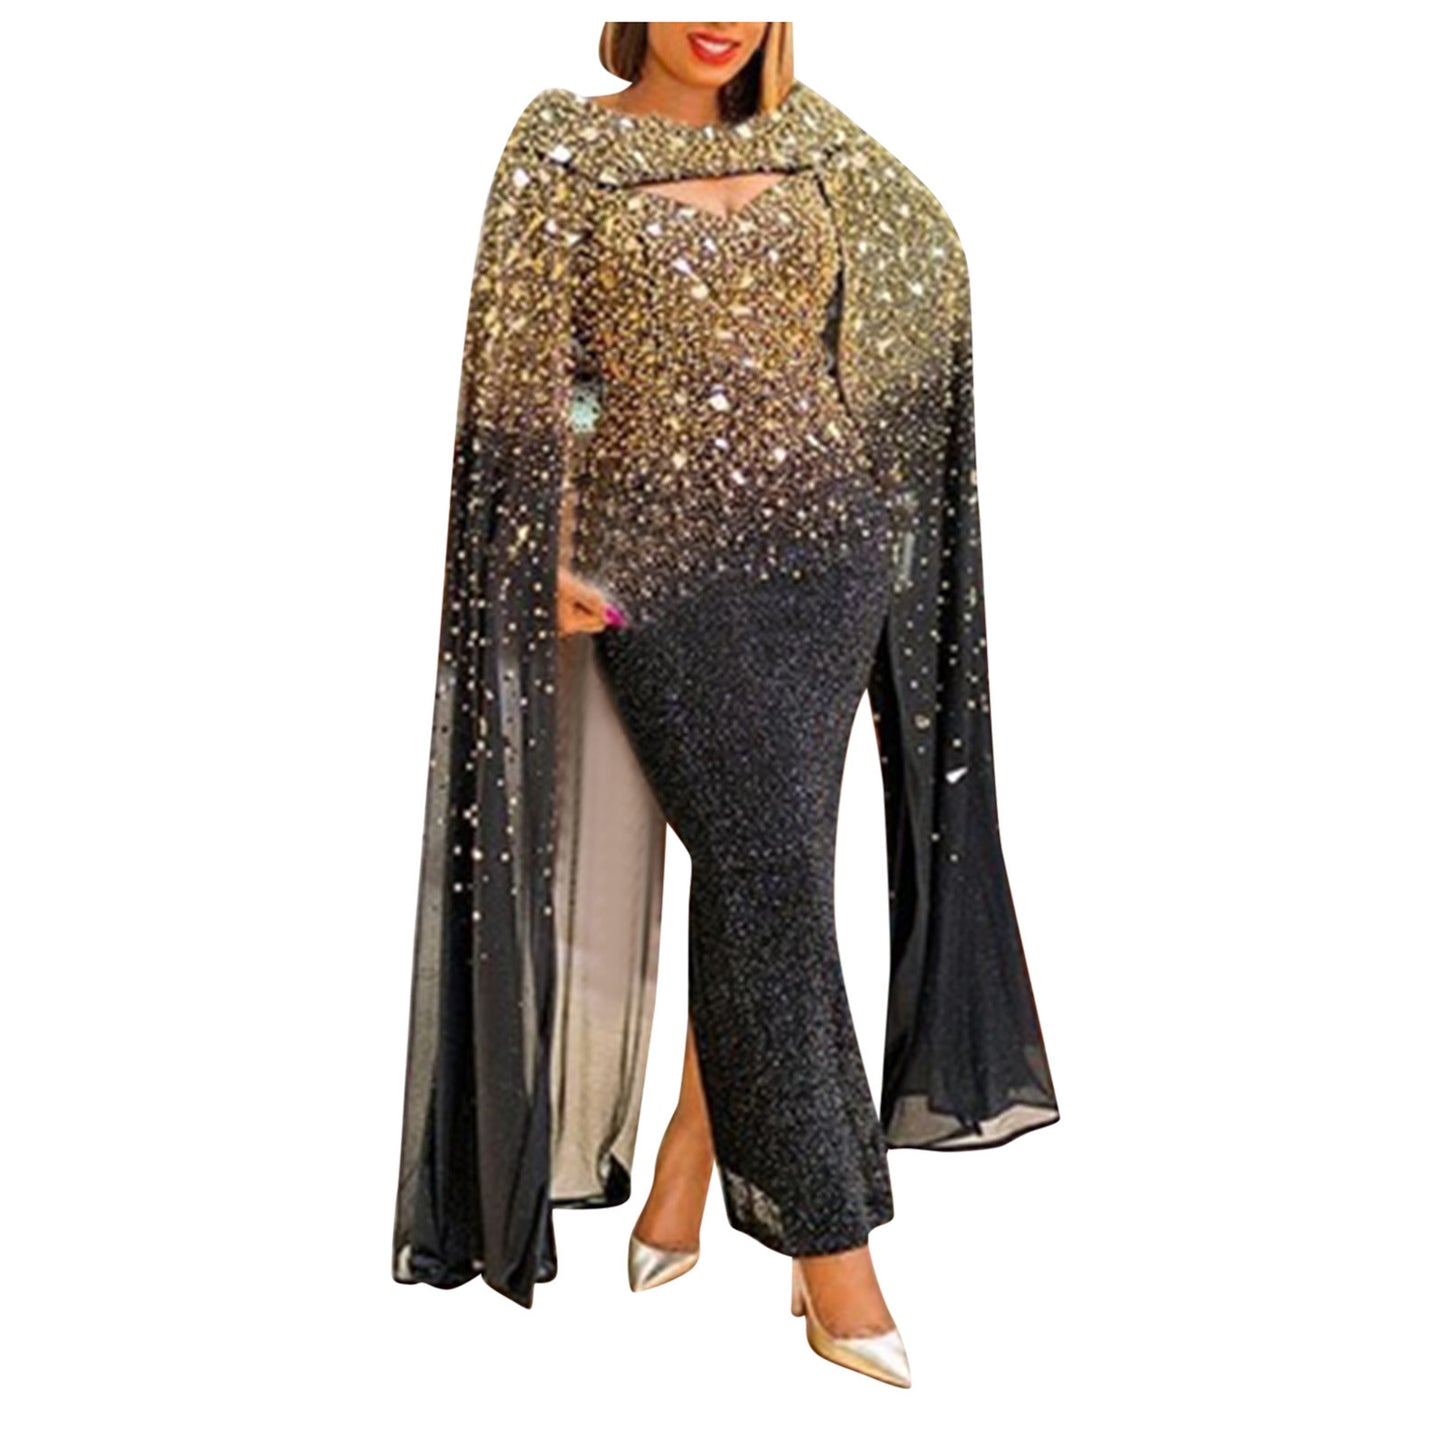 Women's Gold Embroidered Sexy Cloak Tassel Swing Party Dress Women's Gold Embroidered Sexy Cloak Tassel Swing Party Dress Women's Gold Embroidered Sexy Cloak Tassel Swing Party Dress 